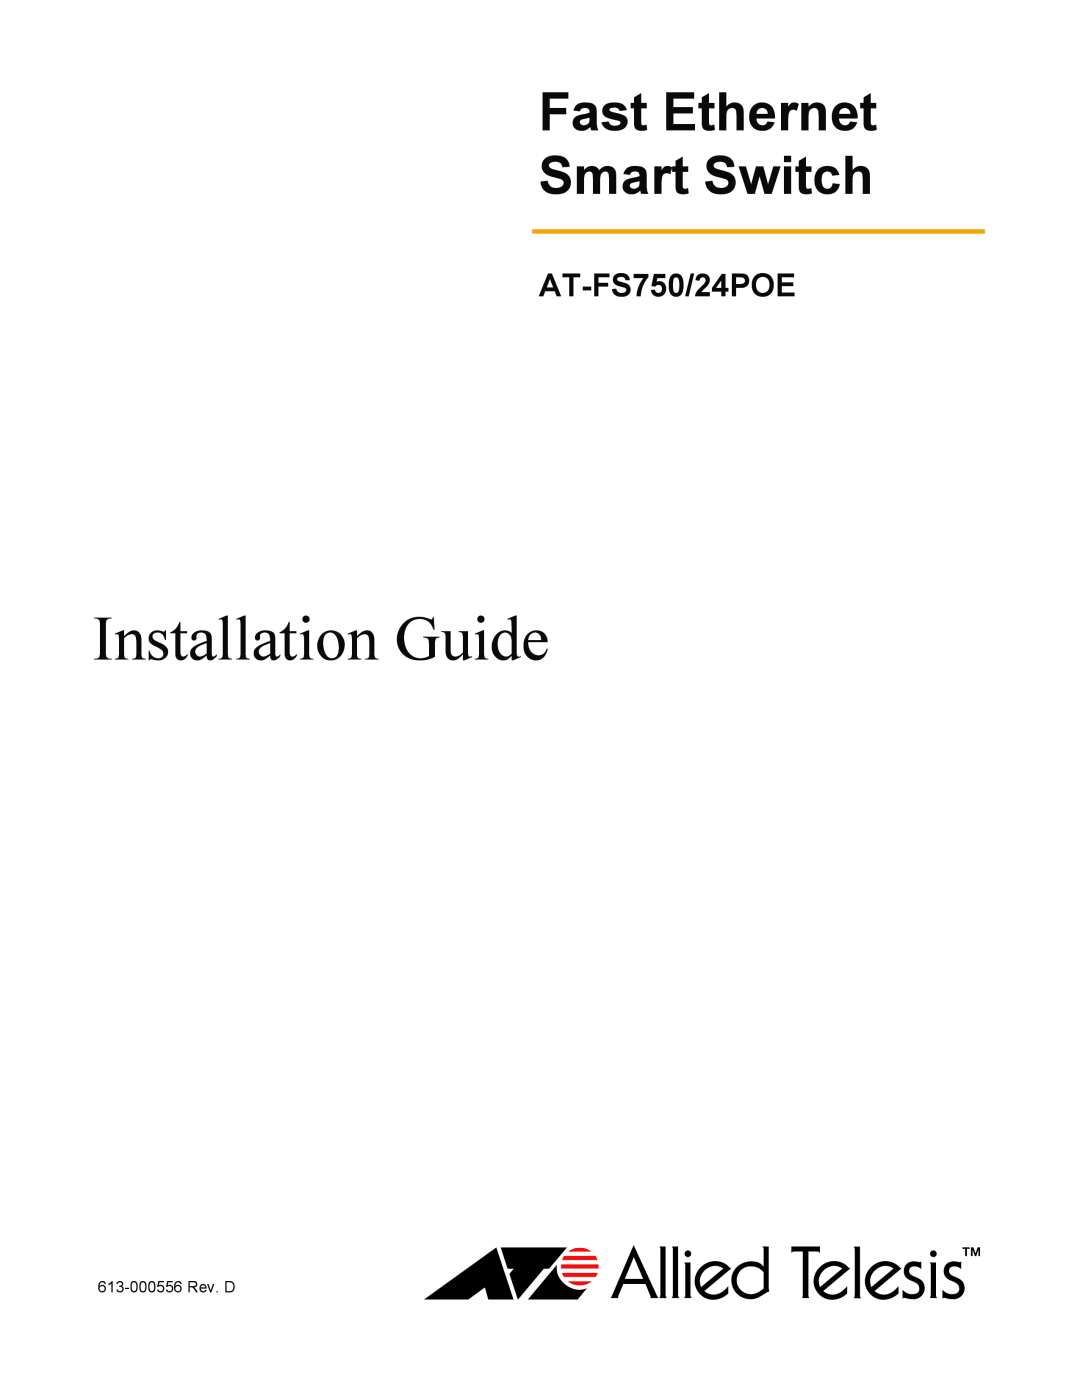 Allied Telesis AT-FS750/24POE manual Installation Guide, Fast Ethernet Smart Switch 